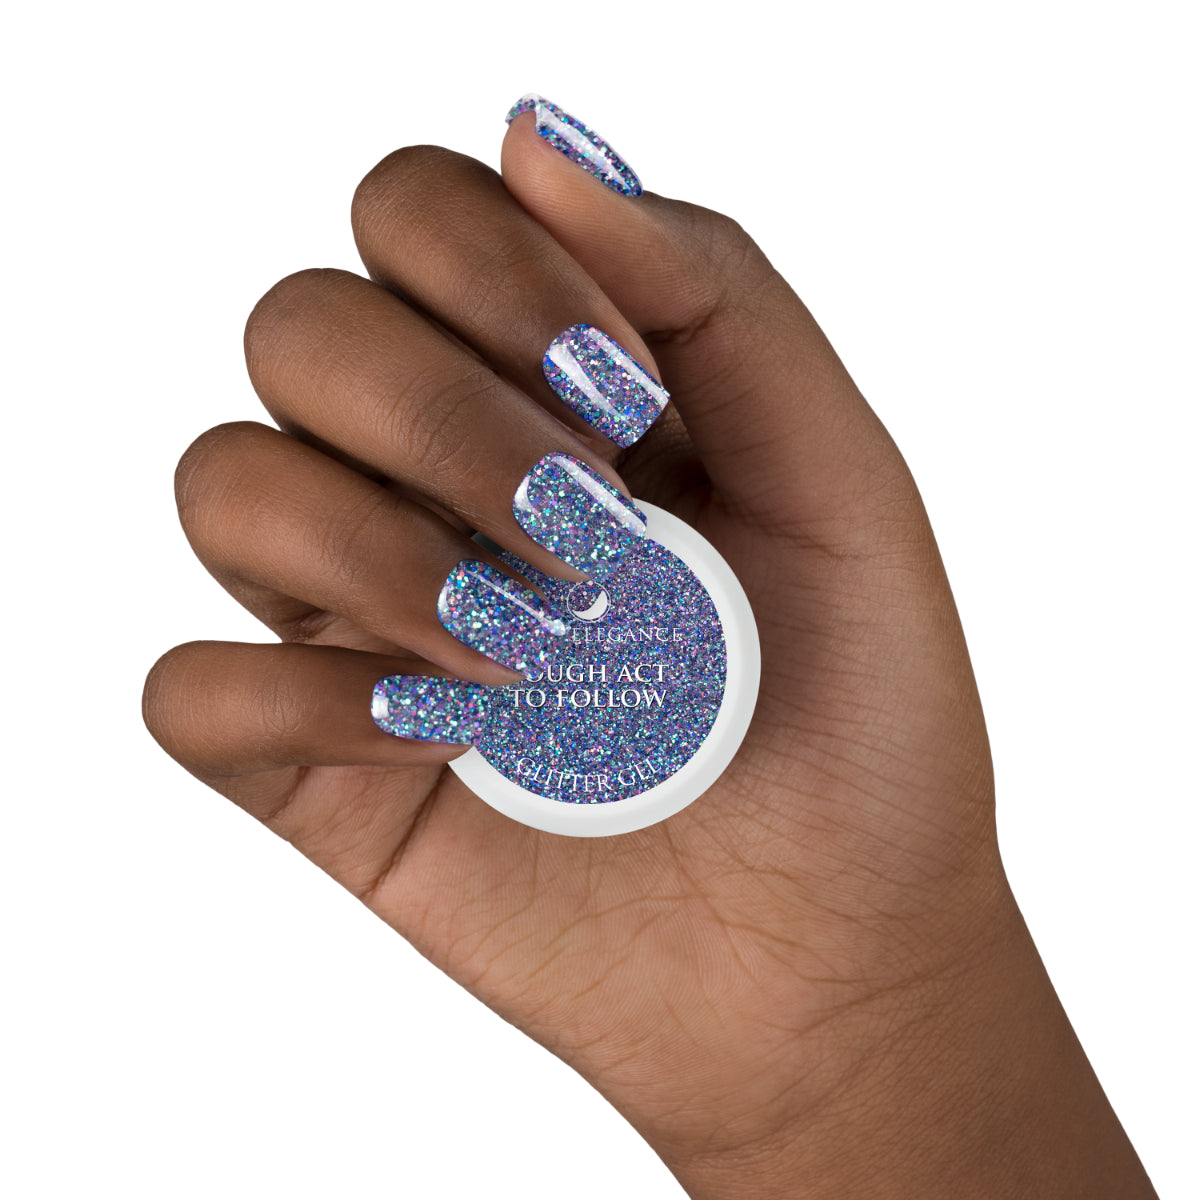 Light Elegance Glitter Gel - Tough Act to Follow :: New Packaging - Creata Beauty - Professional Beauty Products